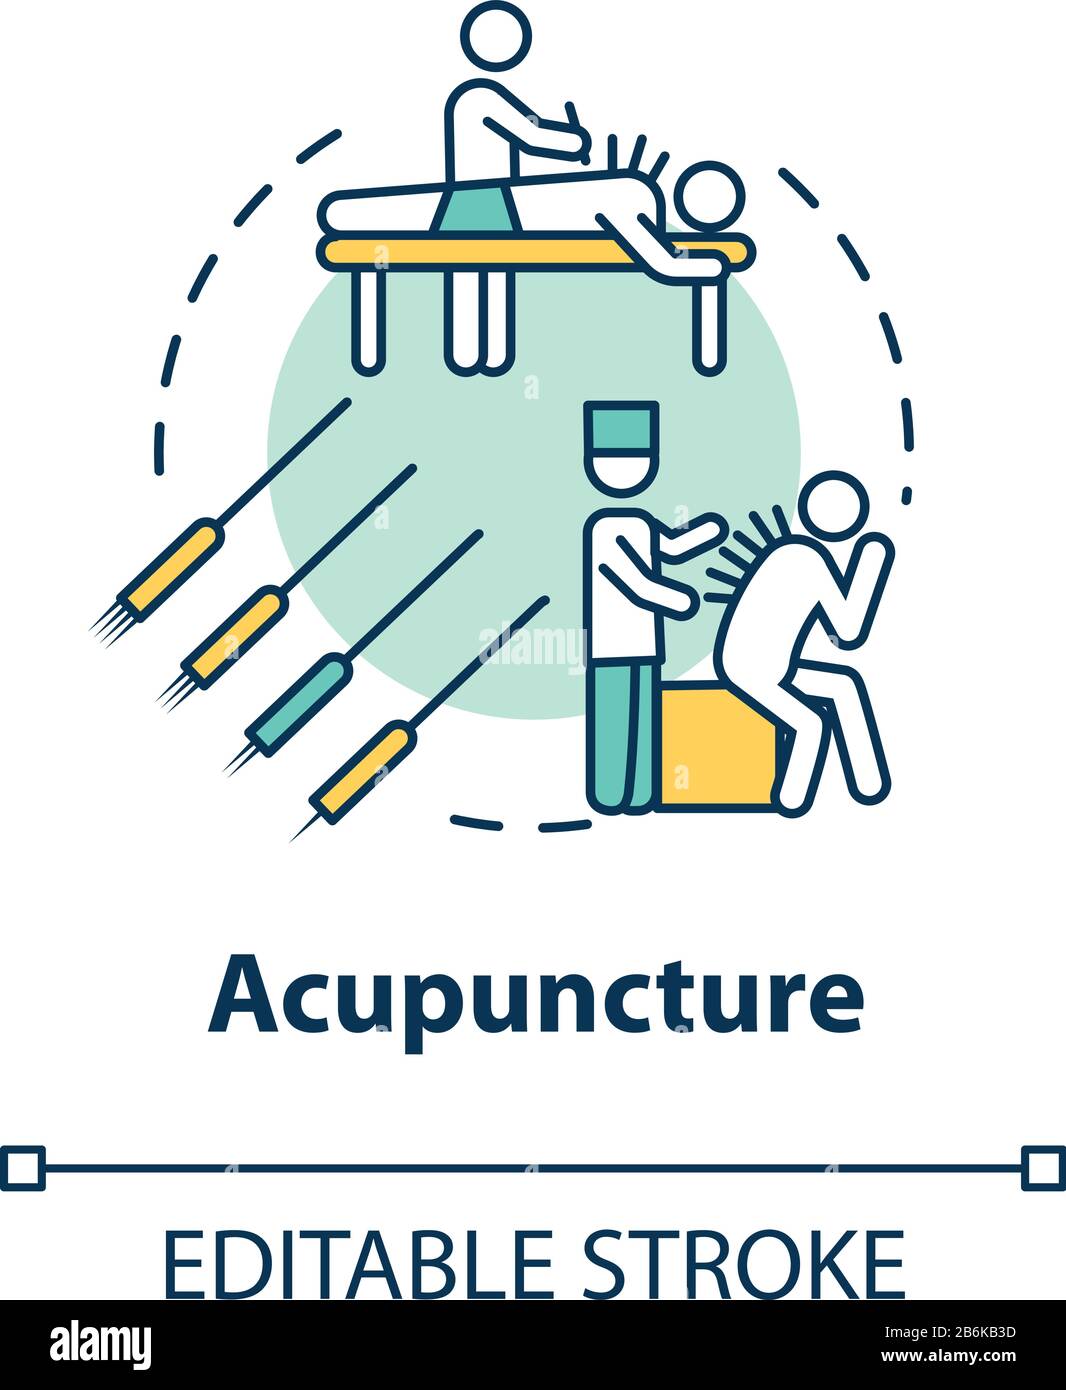 Acupuncture Banner With Woman Face Silhouette And Chinese Needles  Alternative Medicine And Treatment Poster Template Medical Vector  Illustration Stock Illustration - Download Image Now - iStock